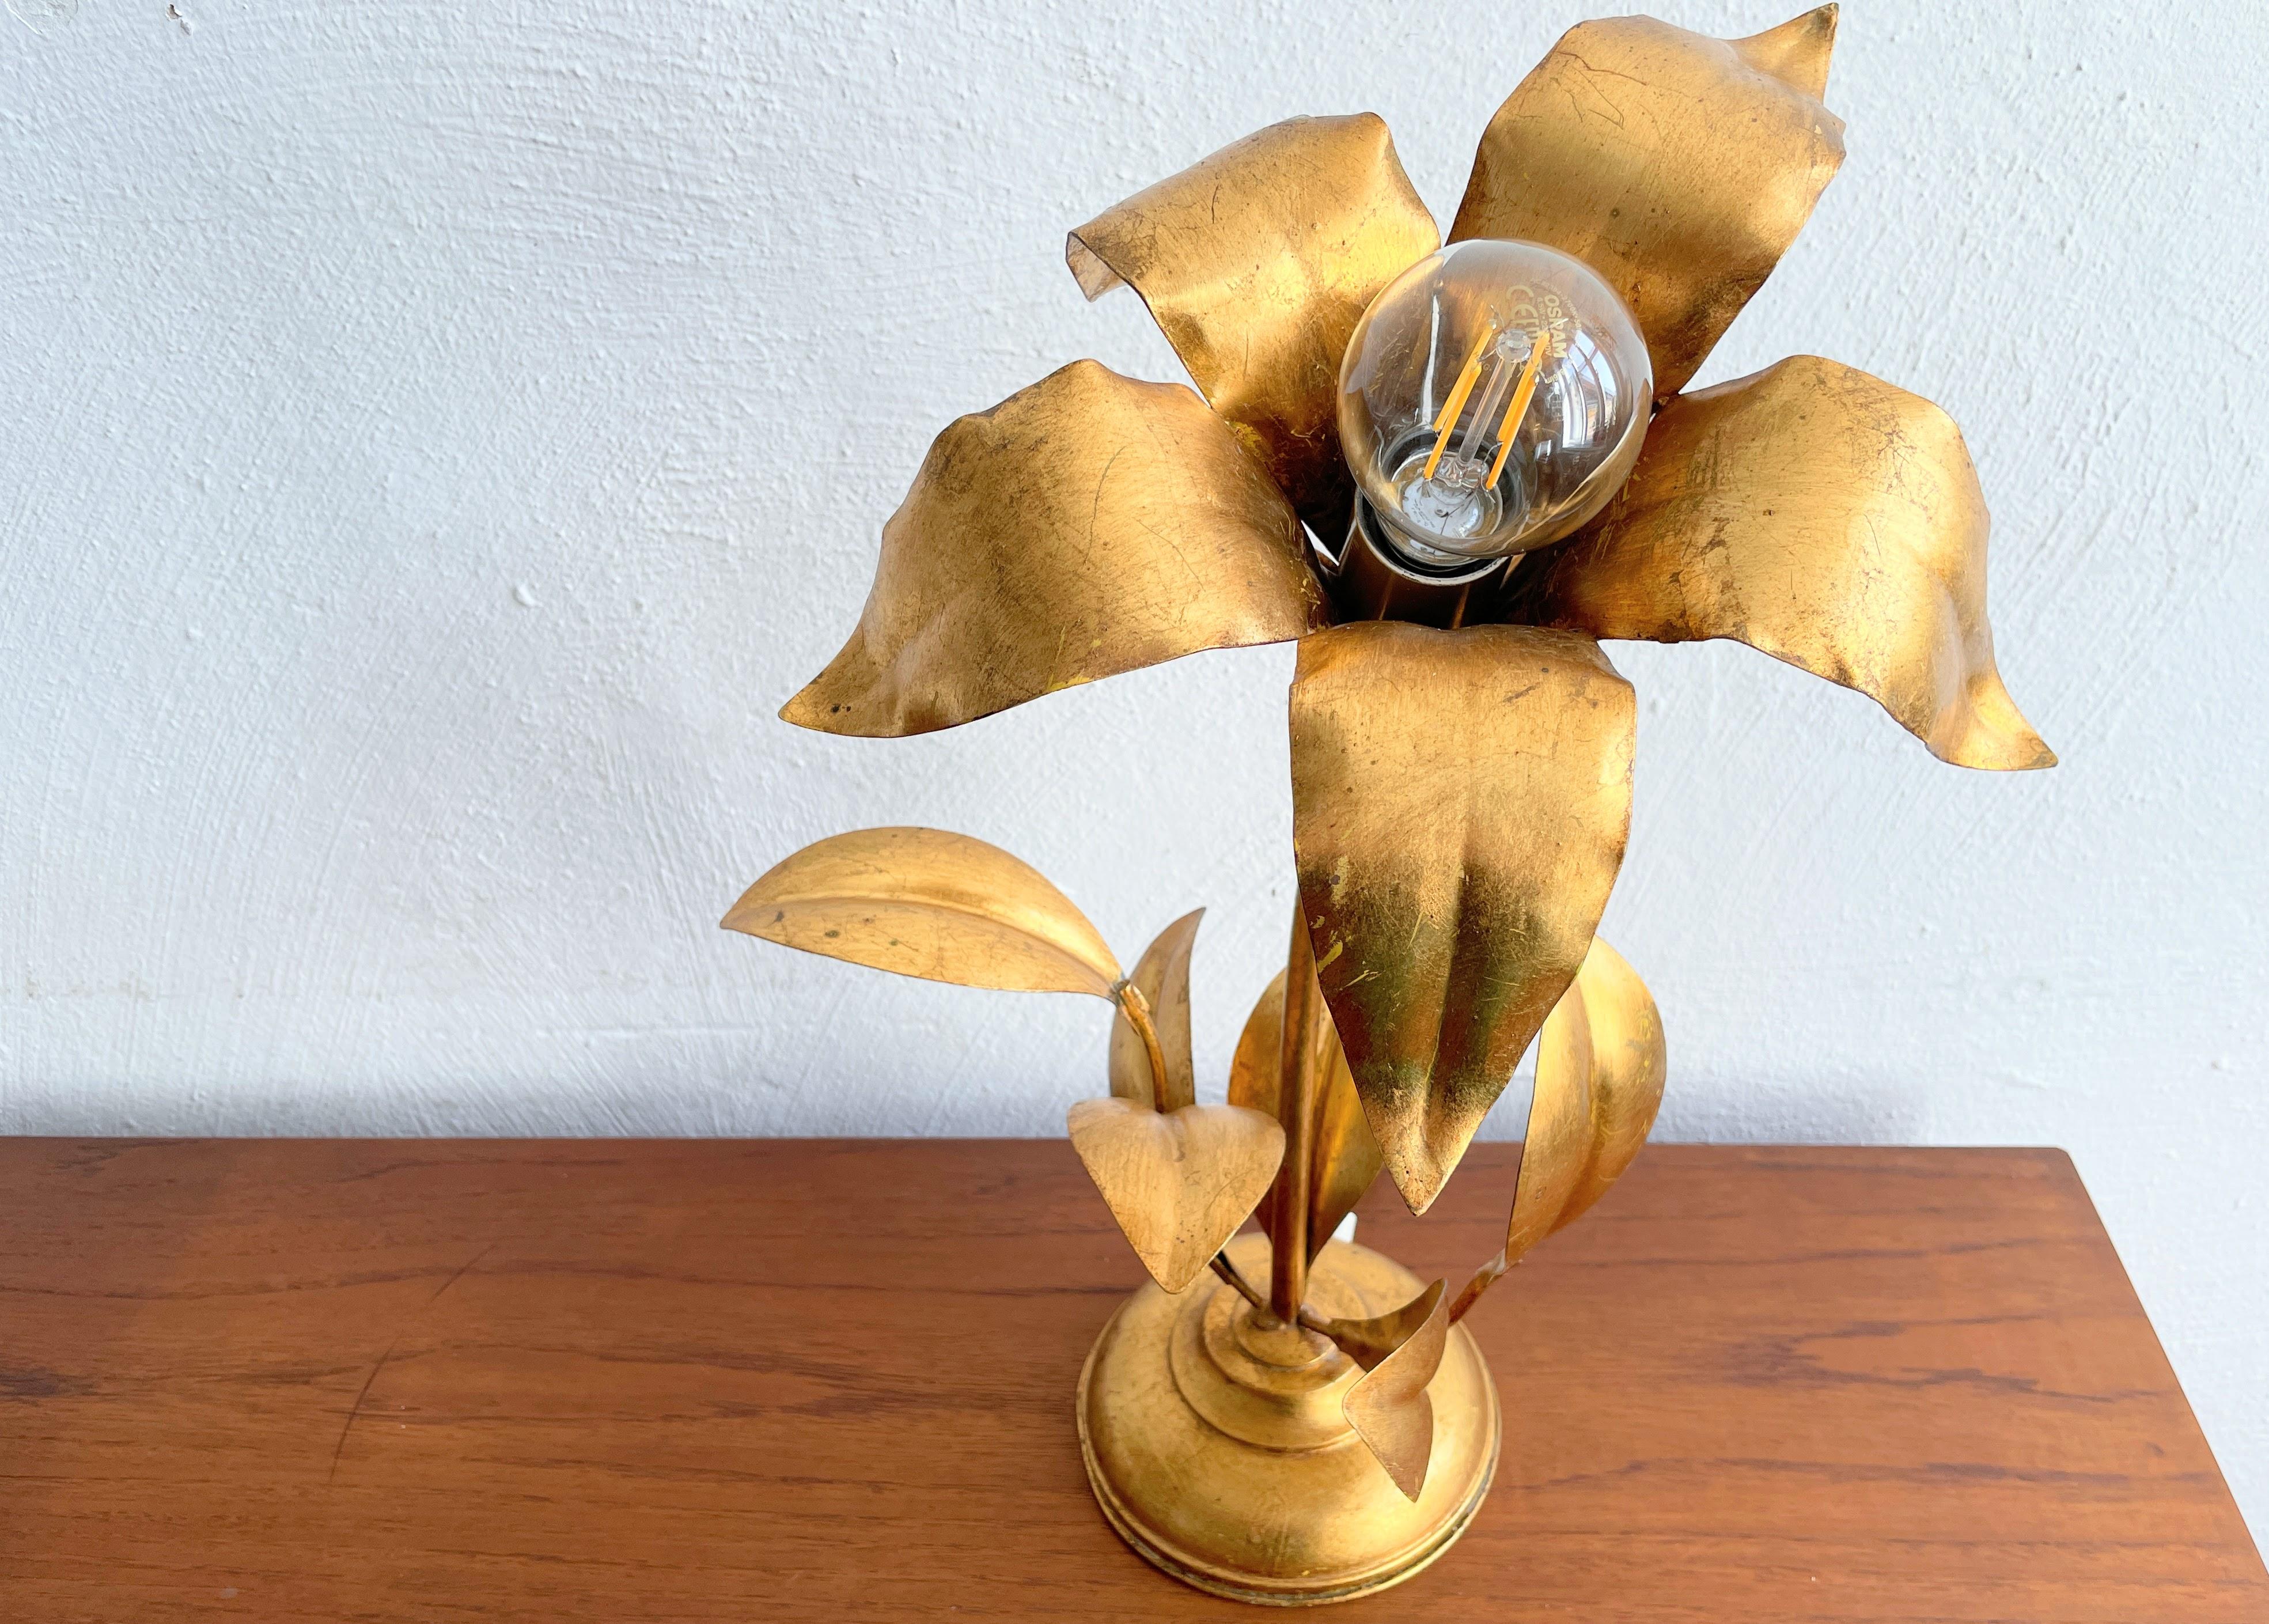 Gilt Hollywood Regency Style Flower-Shaped Table Lamp in the style of Koegl, gold For Sale